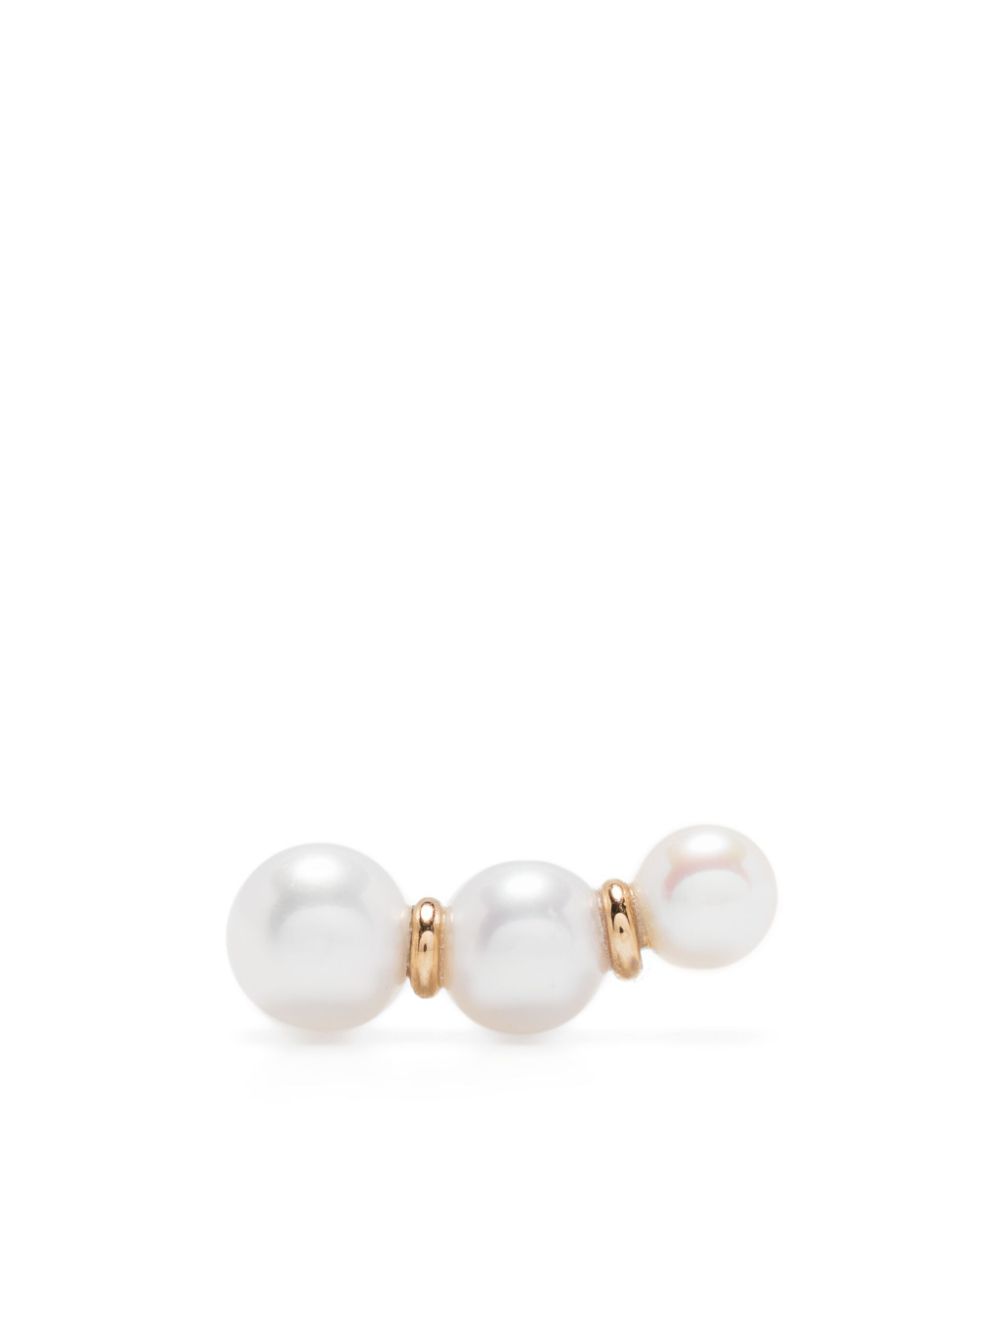 Sophie Bille Brahe Trois Perles 14kt Yellow Gold Single Earring With Pearls In 14k Yg/fresh Water Pearls